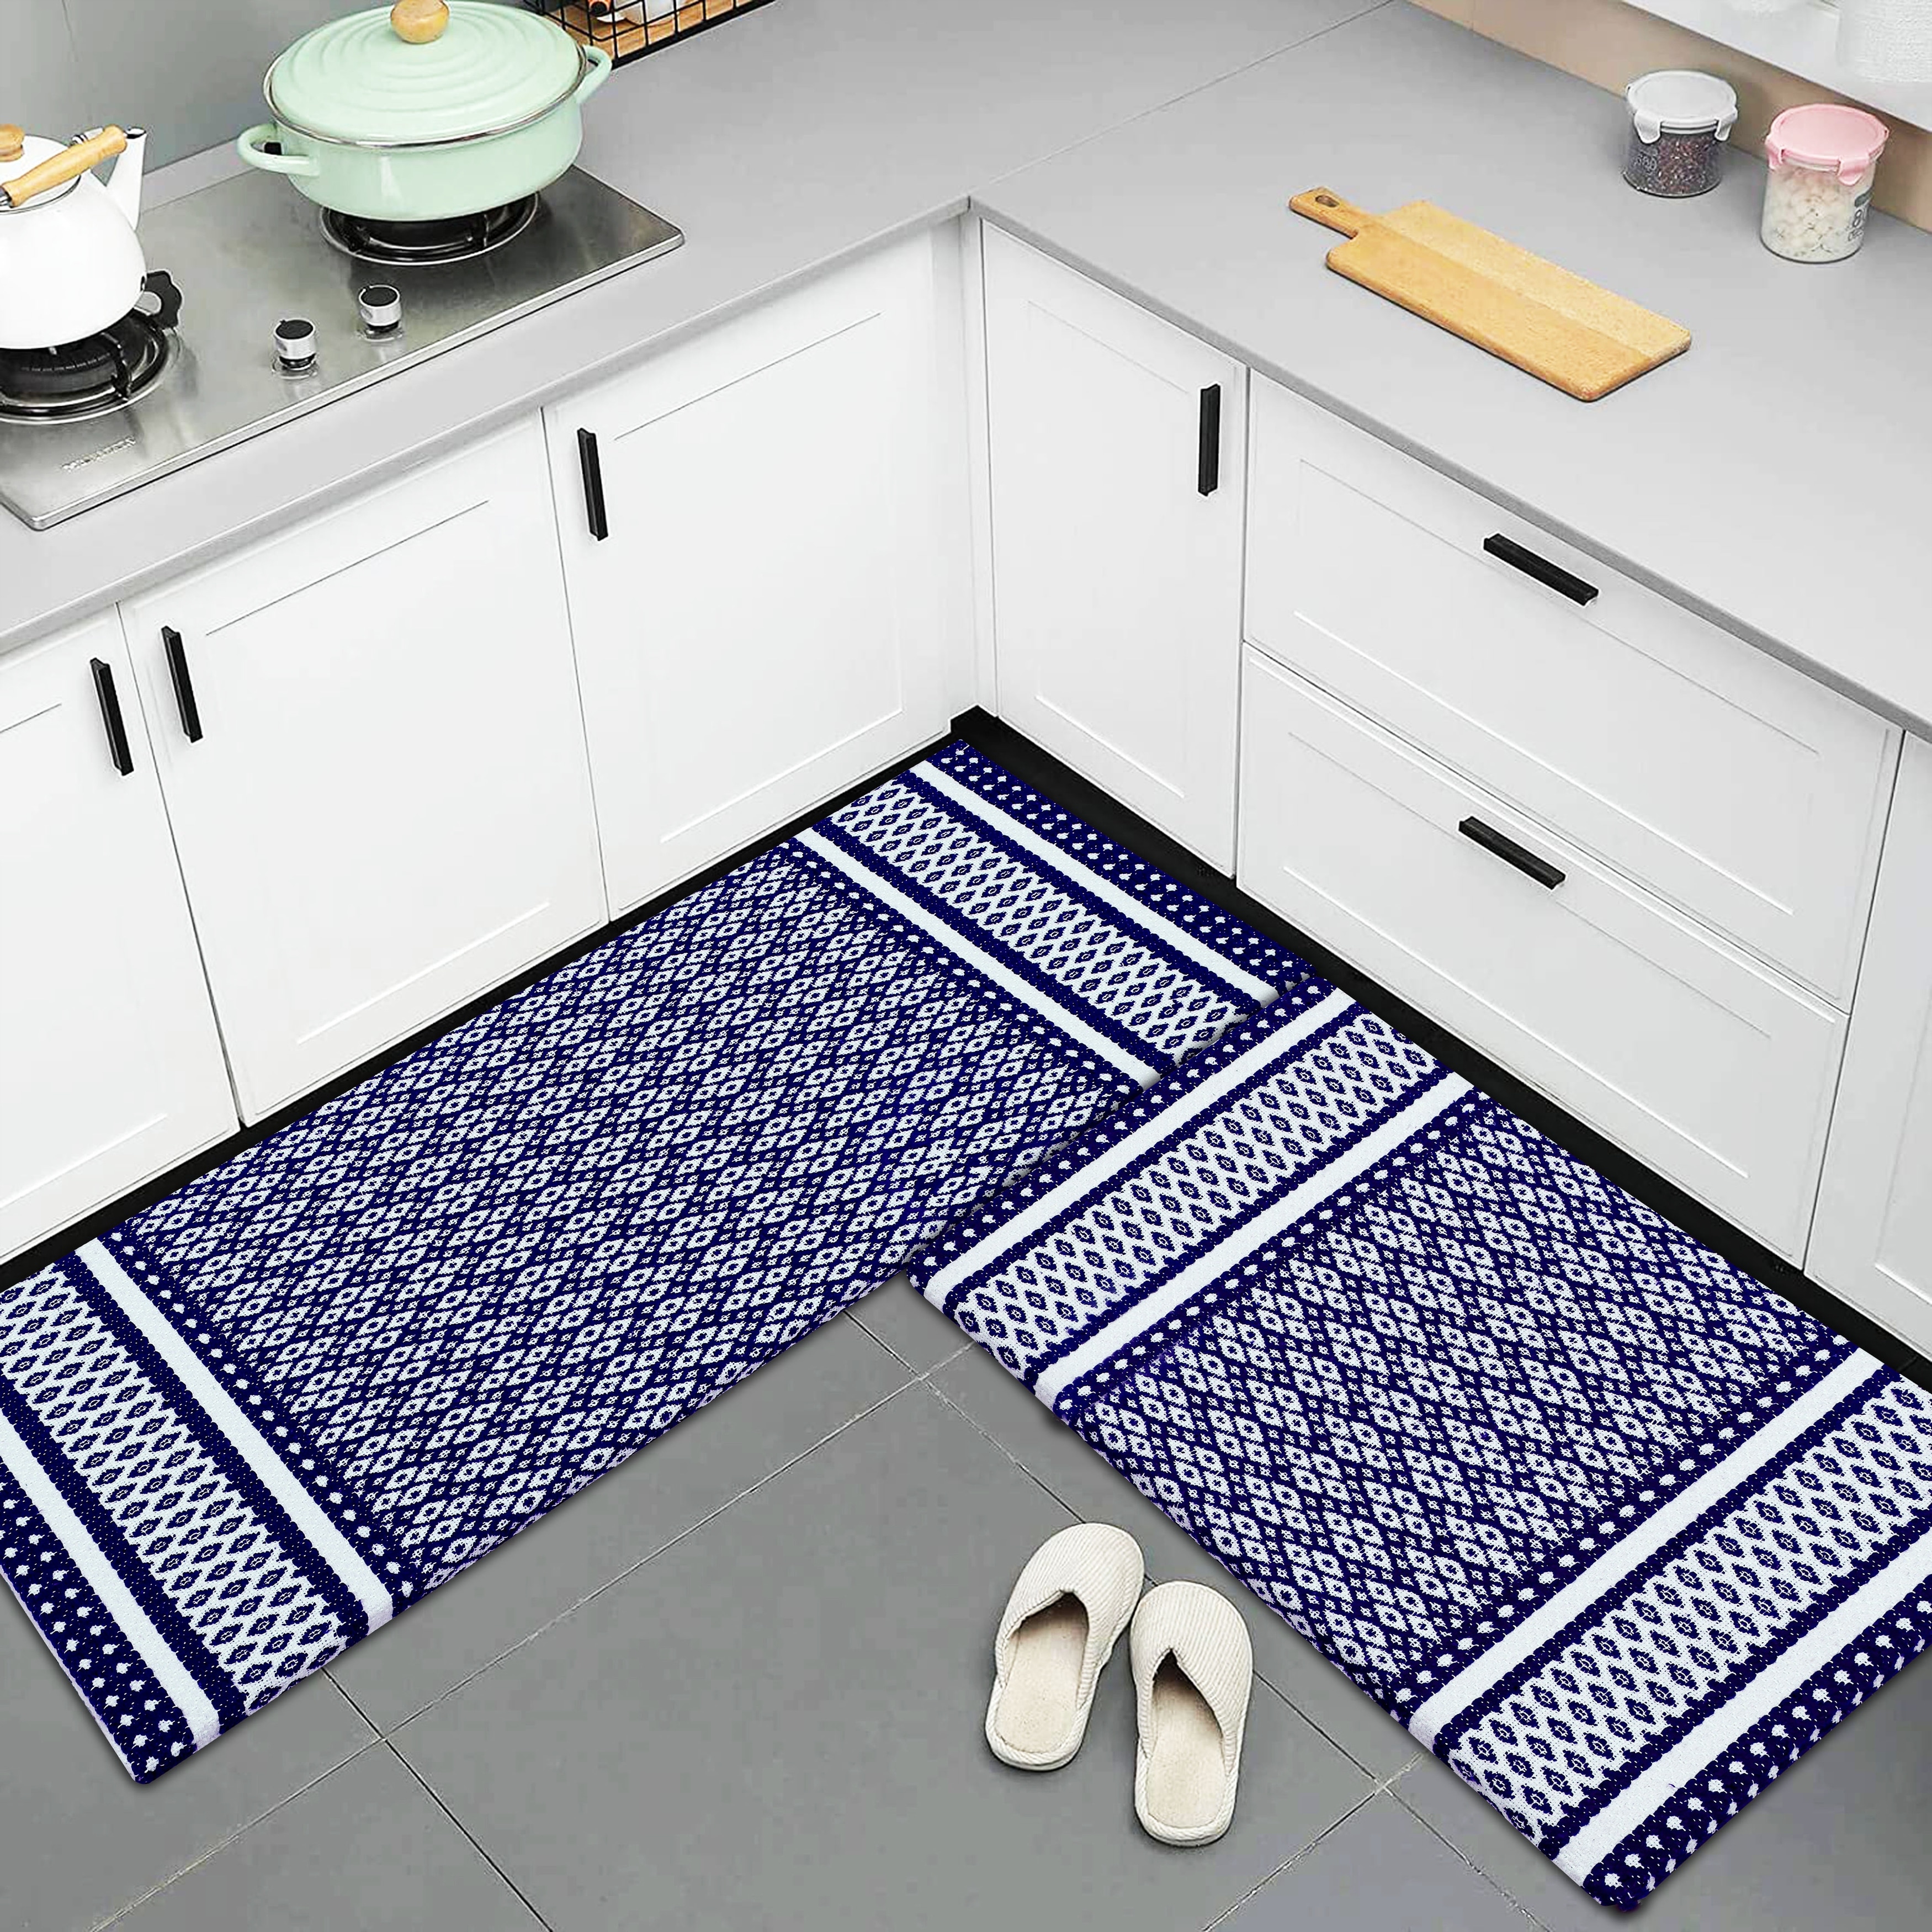 https://ak1.ostkcdn.com/images/products/is/images/direct/4a4c848edab0dff798d60dab3f5de17a8ff41093/Woven-Cotton-Anti-Fatigue-Anti-Skid-Cushioned-Kitchen--Doormat-Bathroom-Mats-%26-Runners.jpg